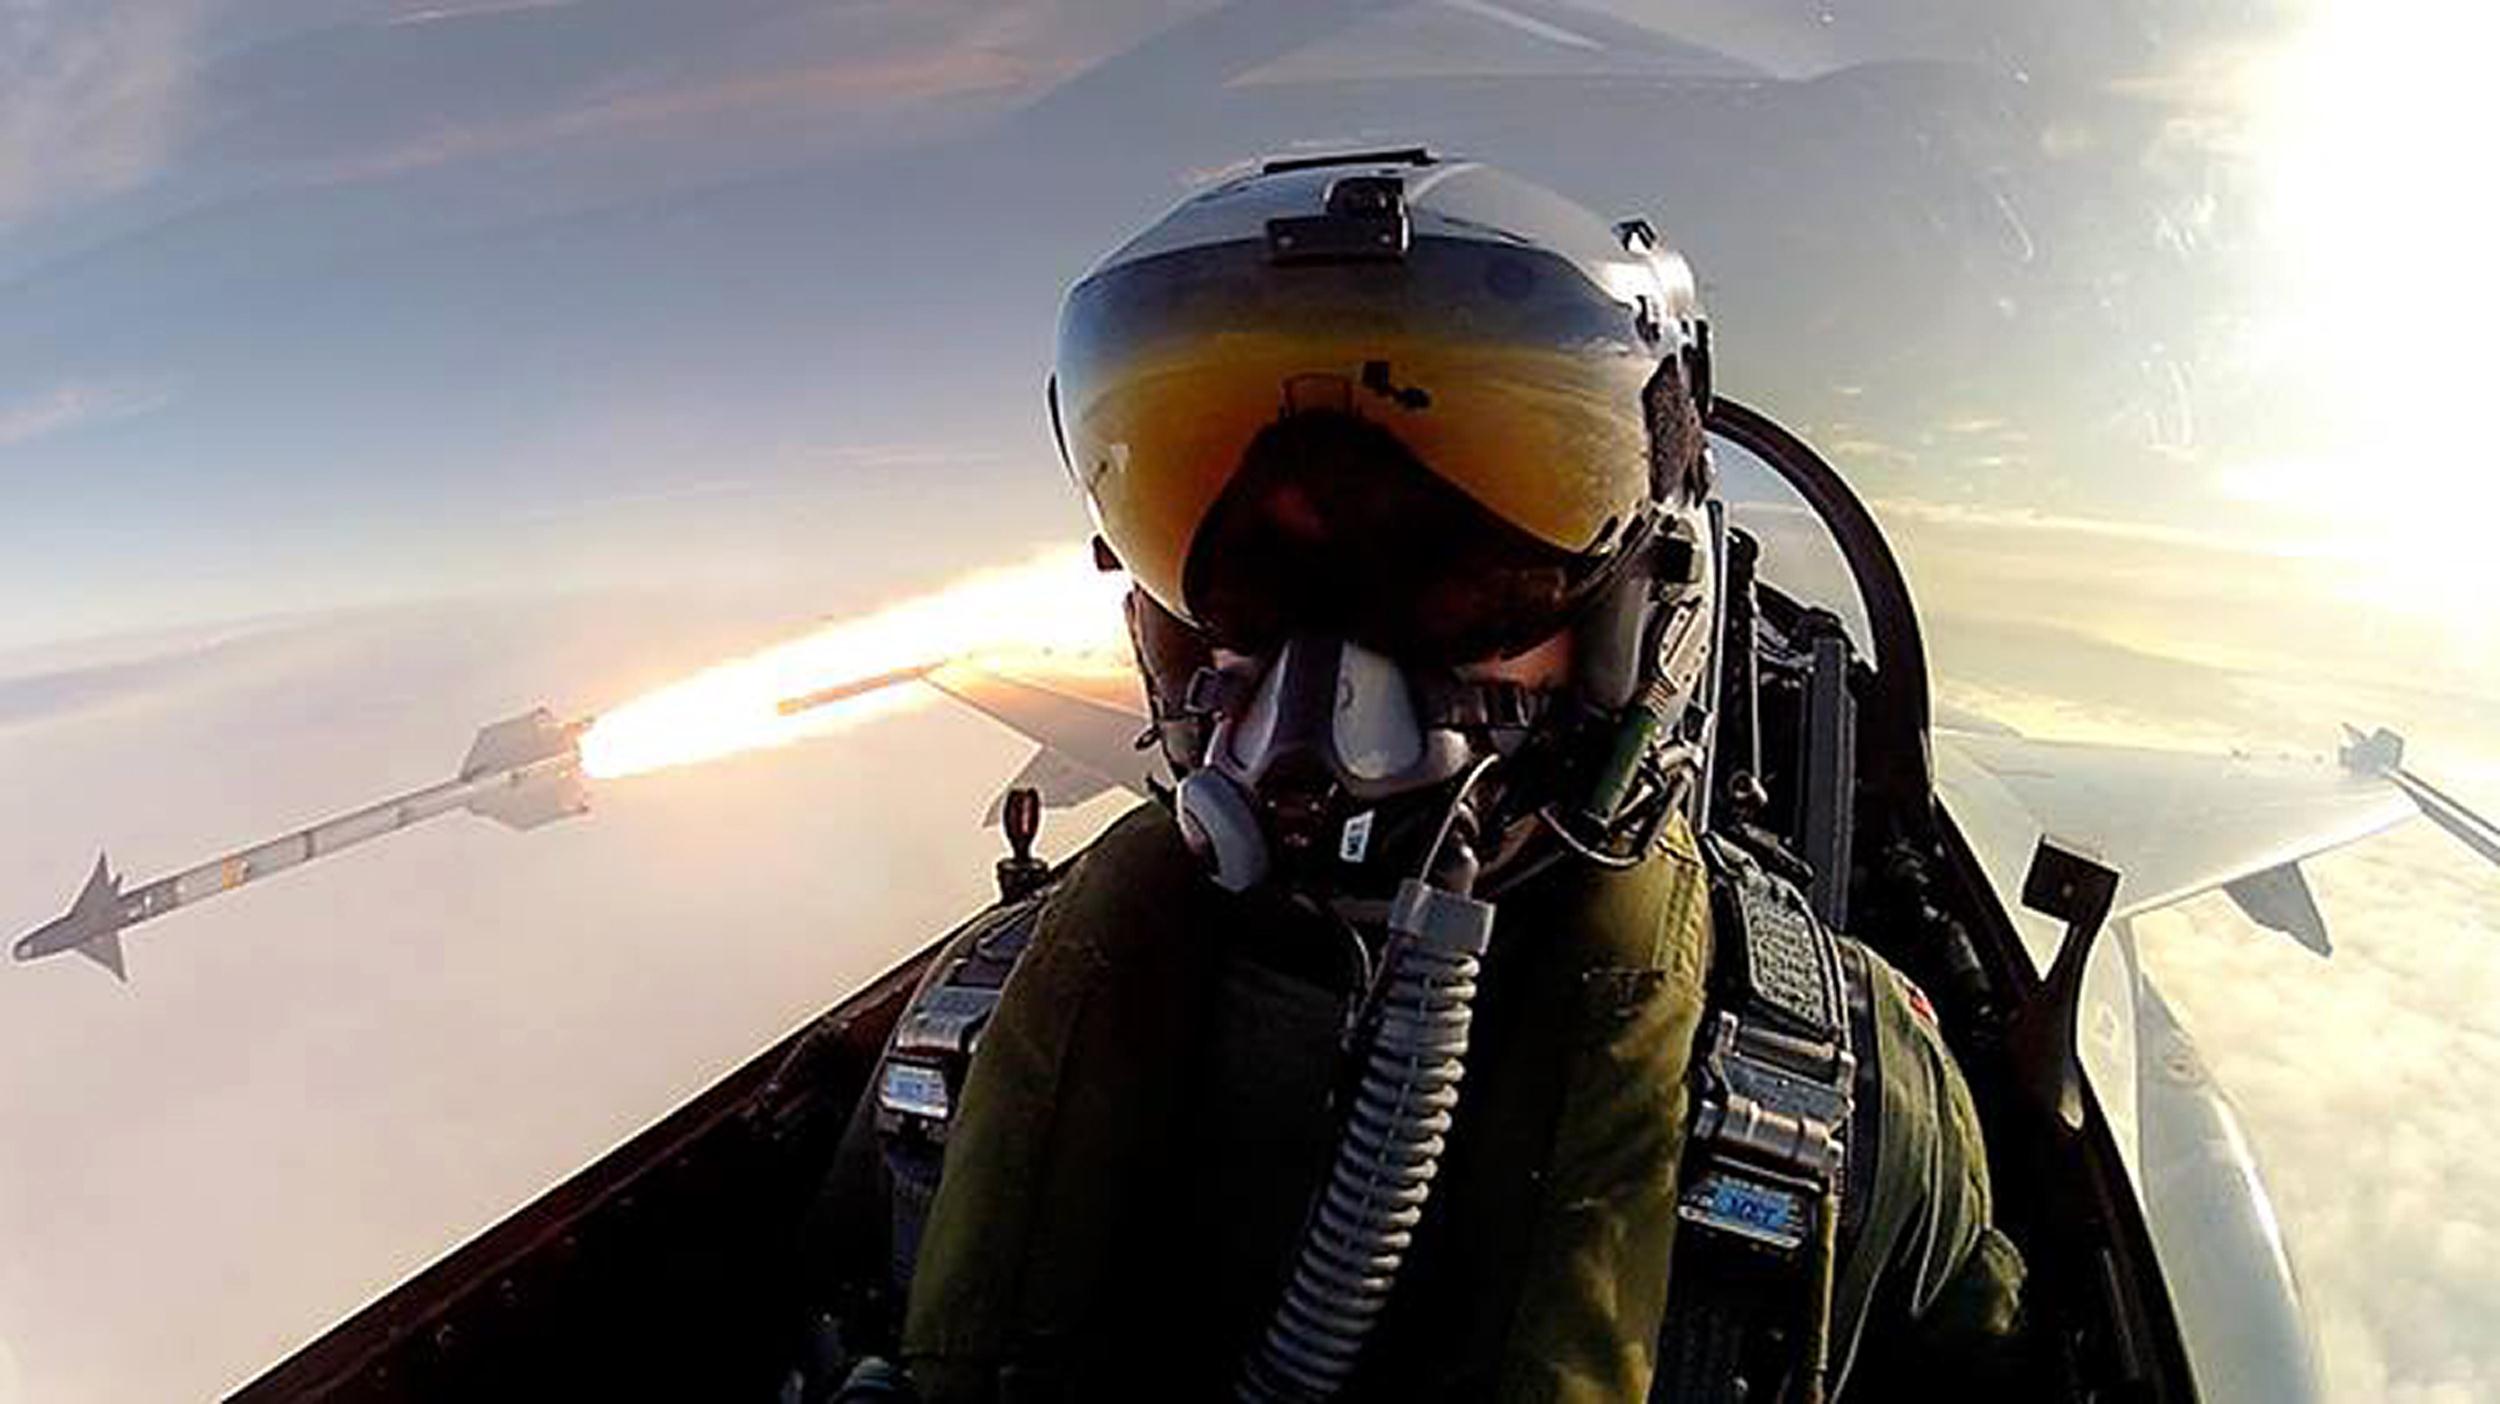 Yep, makes sense to meHes in a fighter plane firing missiles and taking selfieswhats not to understand?